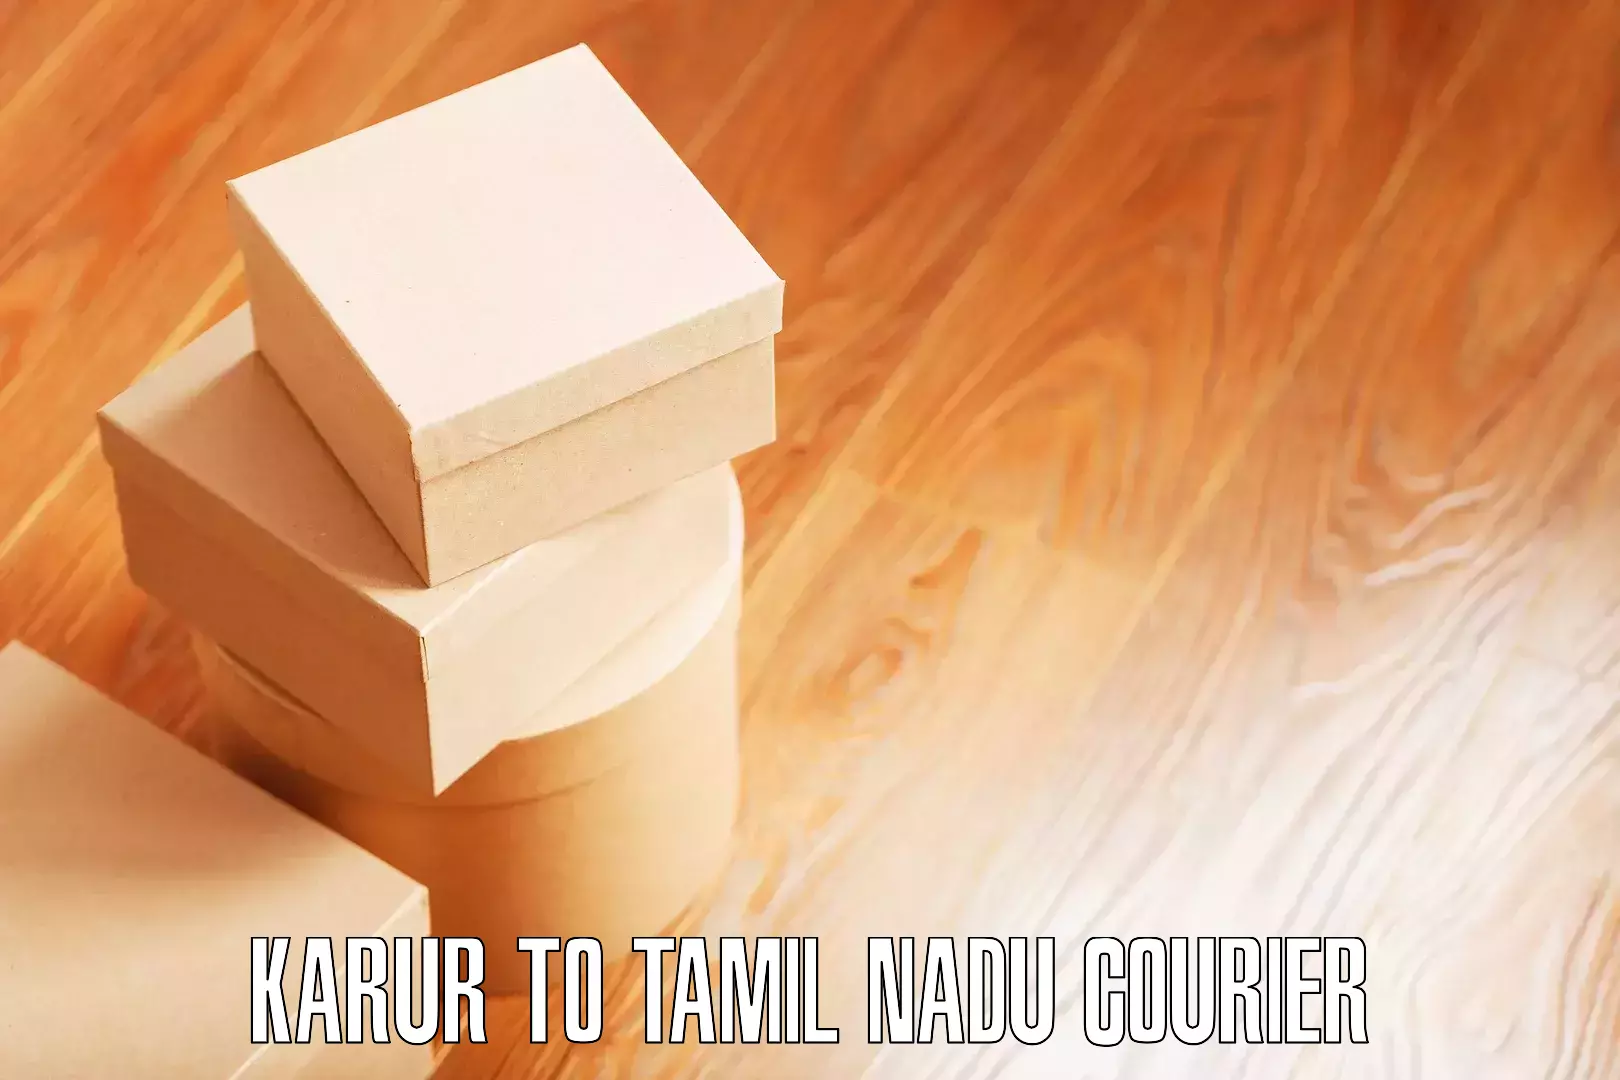 Full home relocation services in Karur to Gobichettipalayam